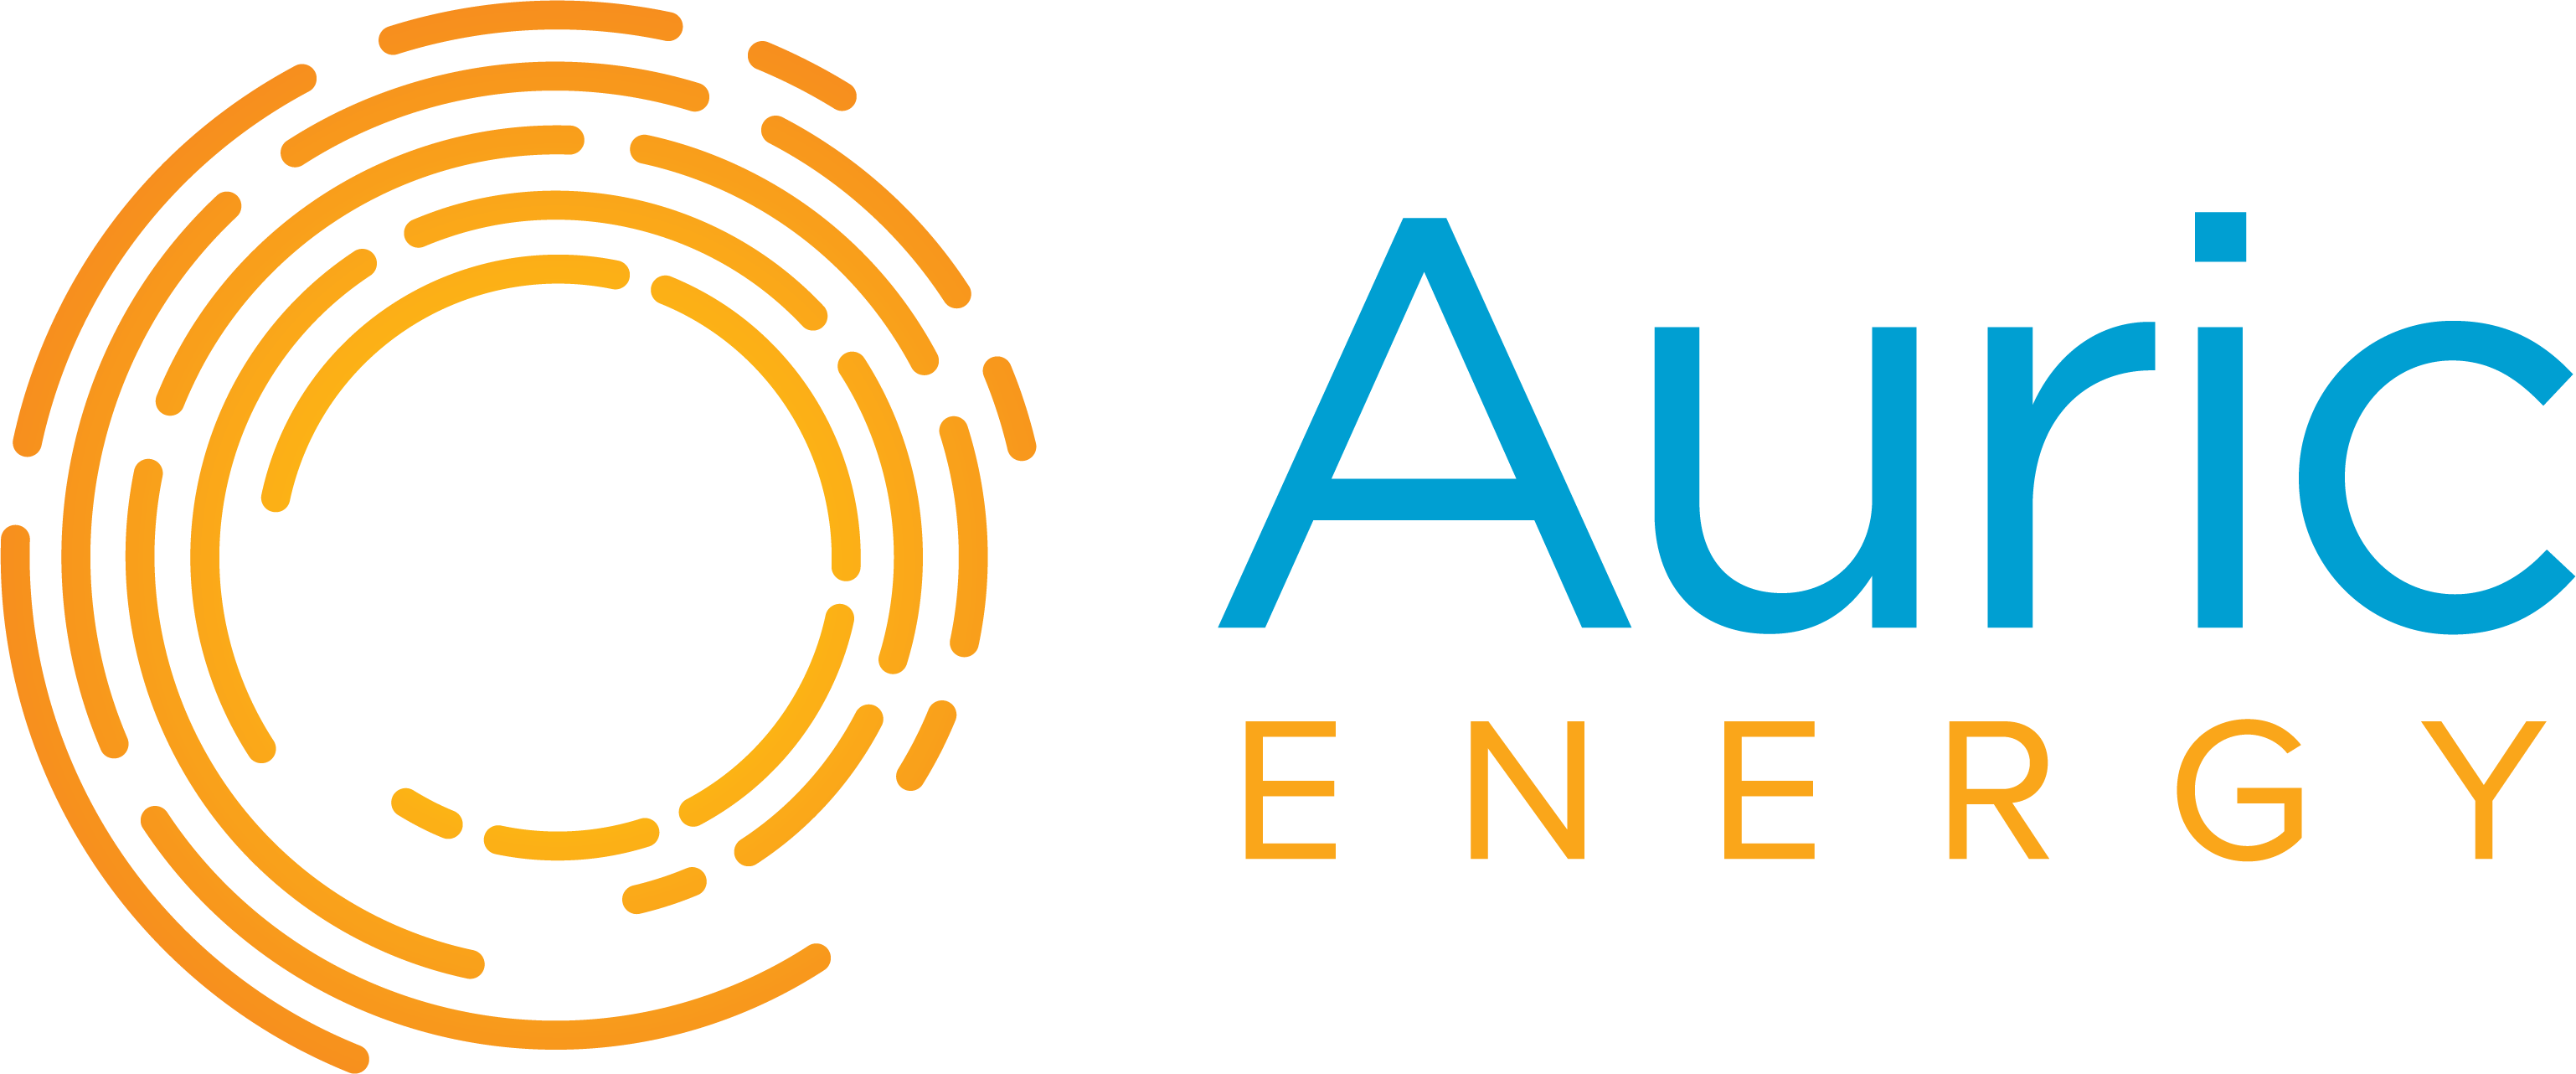 Appointment Logo - Auric Energy - Appointment Setter - Wage + Bonus + Incentives!